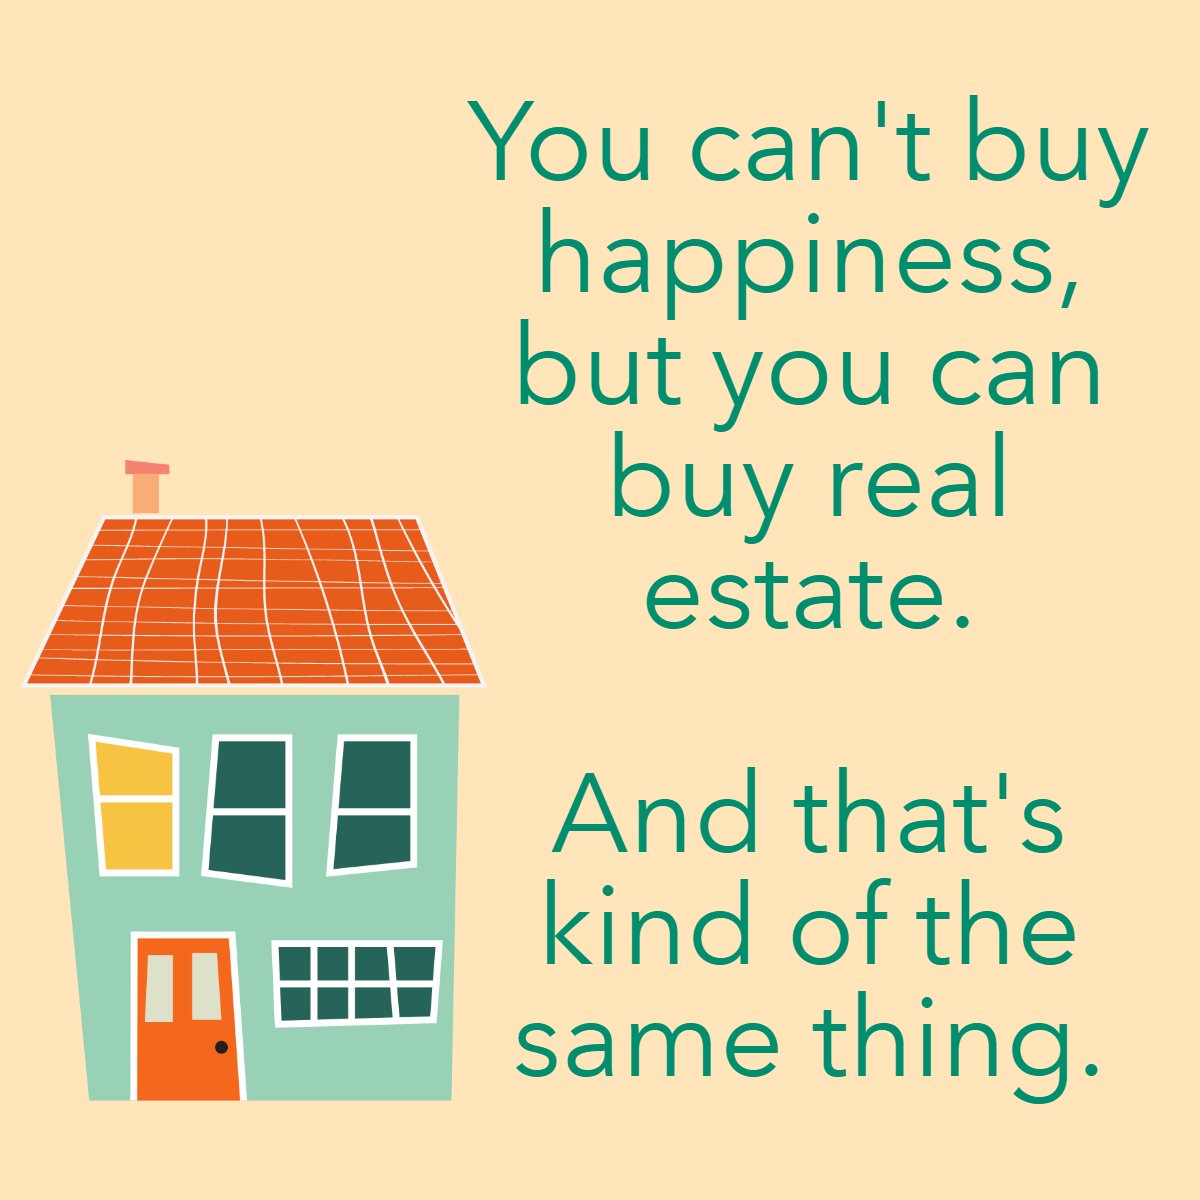 What do you think? 🏠 ❤️

#happiness #realestate #happinessquotes #myhappiness #realestatelifestyle #realestatecoach
 #myhousefl #realestate #Floridarealestate #sellyourhouse #buyyourhome #JoelSantos #MVPREALTY #LehighAcresFlorida #SWFLRealEstate